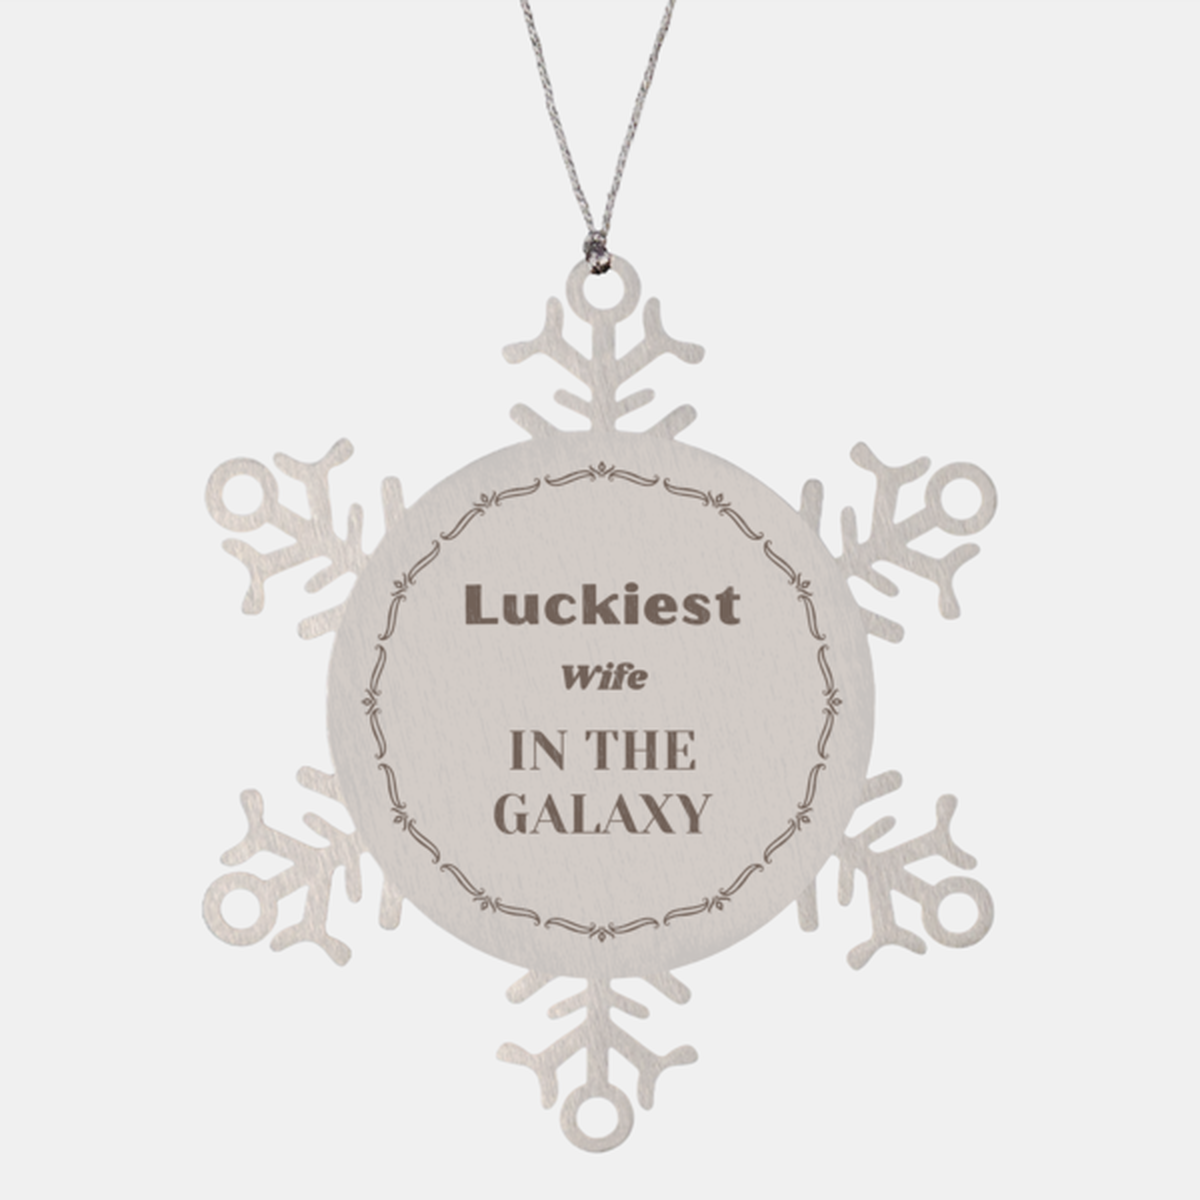 Luckiest Wife in the Galaxy, To My Wife Ornament Gifts, Christmas Wife Snowflake Ornament Gifts, X-mas Decorations Unique Gifts For Wife Men Women